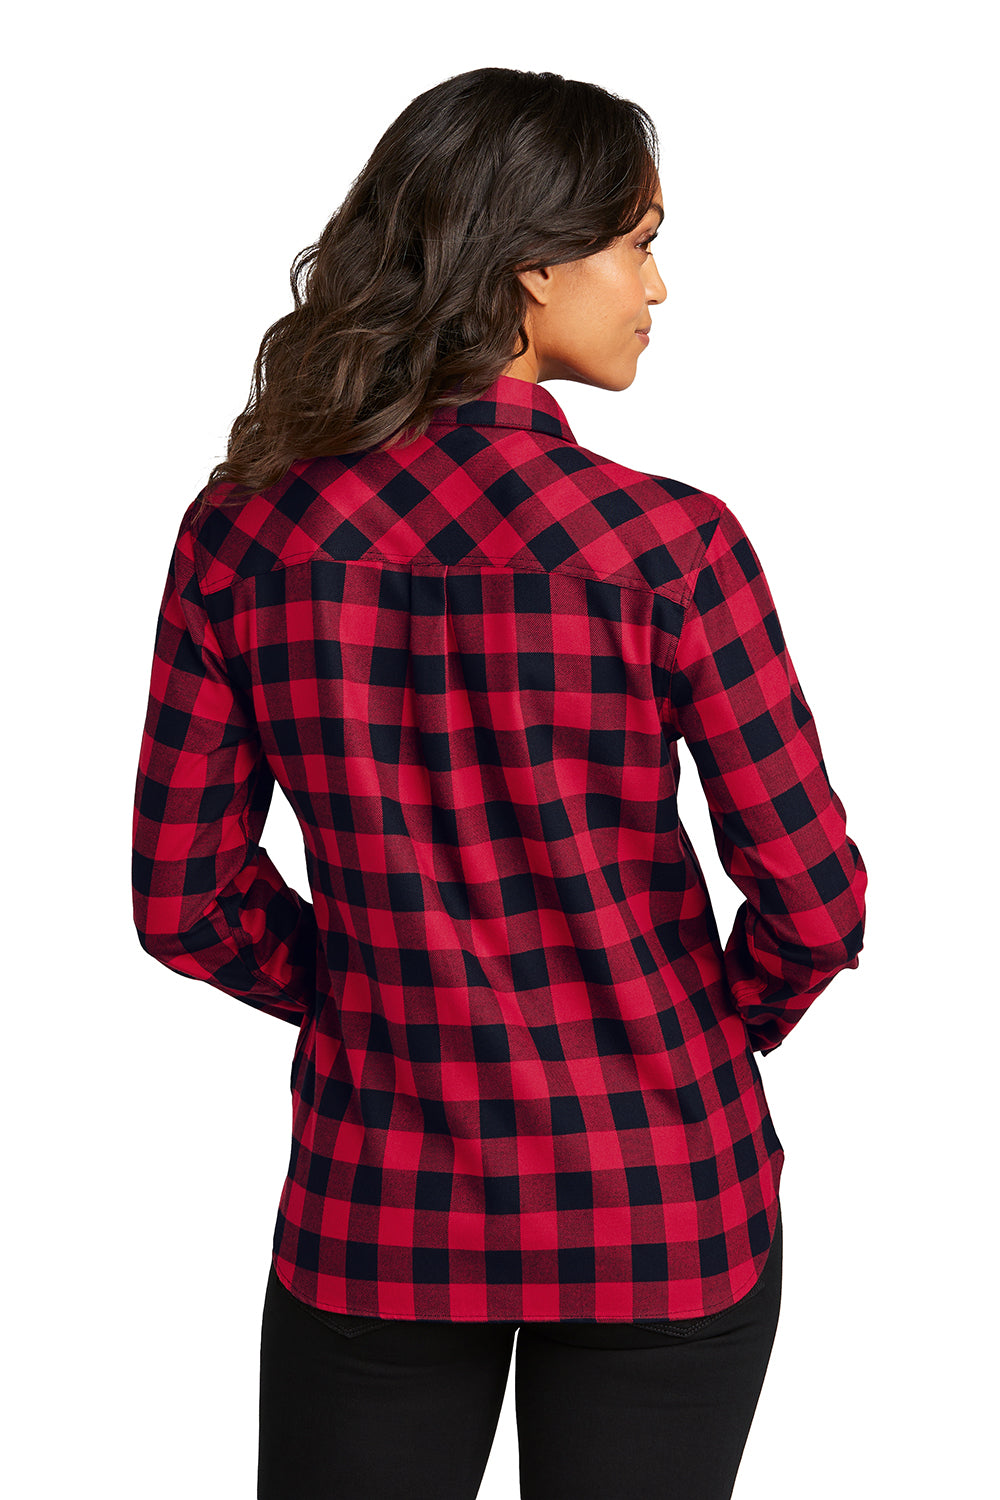 Port Authority LW669 Womens Plaid Flannel Long Sleeve Button Down Shirt Red/Black Buffalo Back